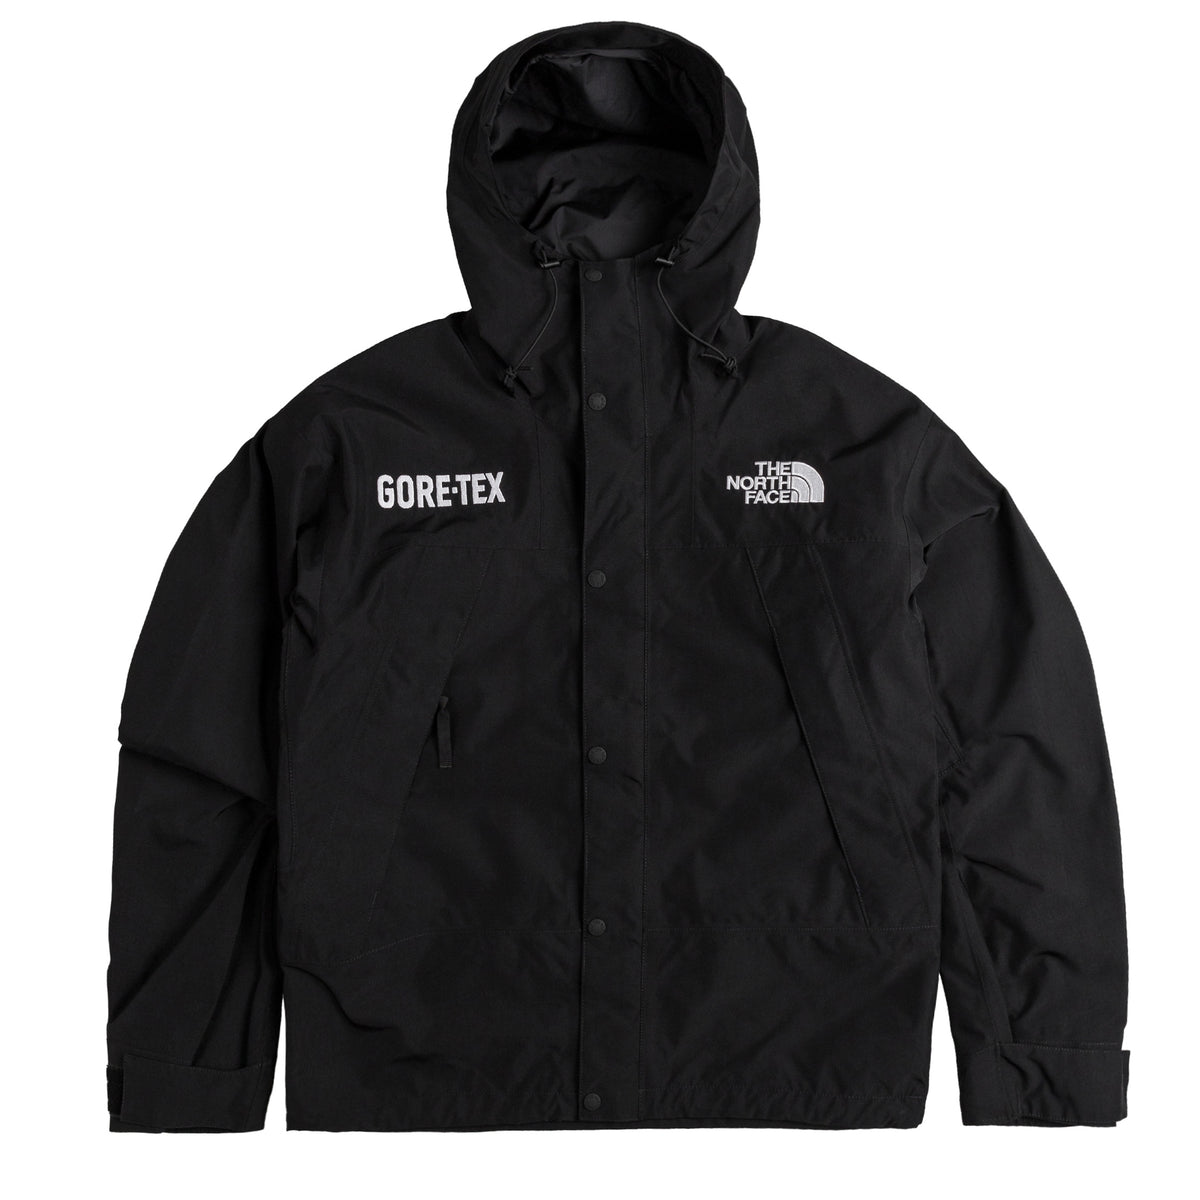 The North Face Gore-Tex Mountain Jacket » Buy online now!